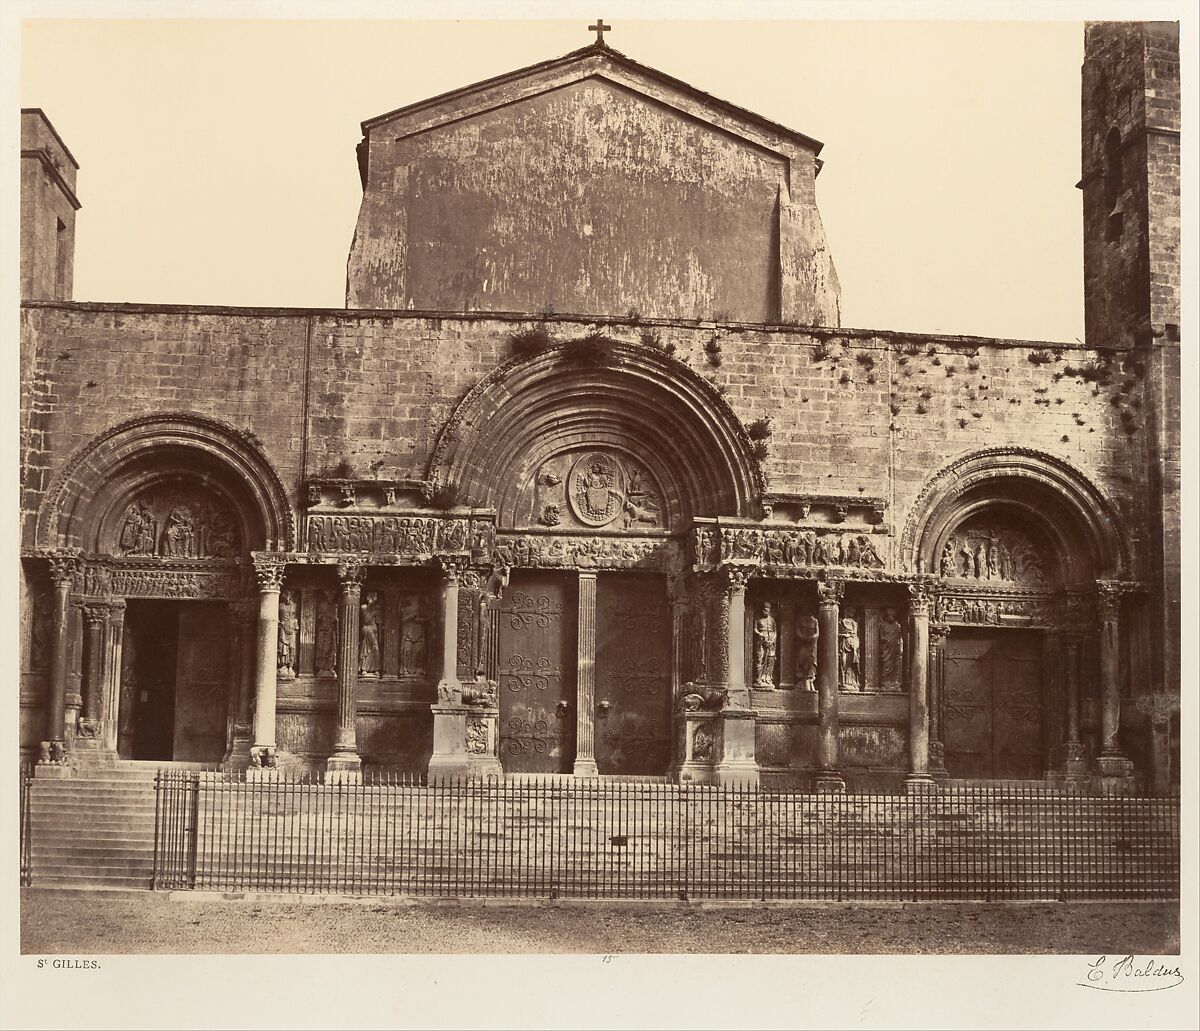 St. Gilles, Edouard Baldus (French (born Prussia), 1813–1889), Albumen silver print from paper negative 